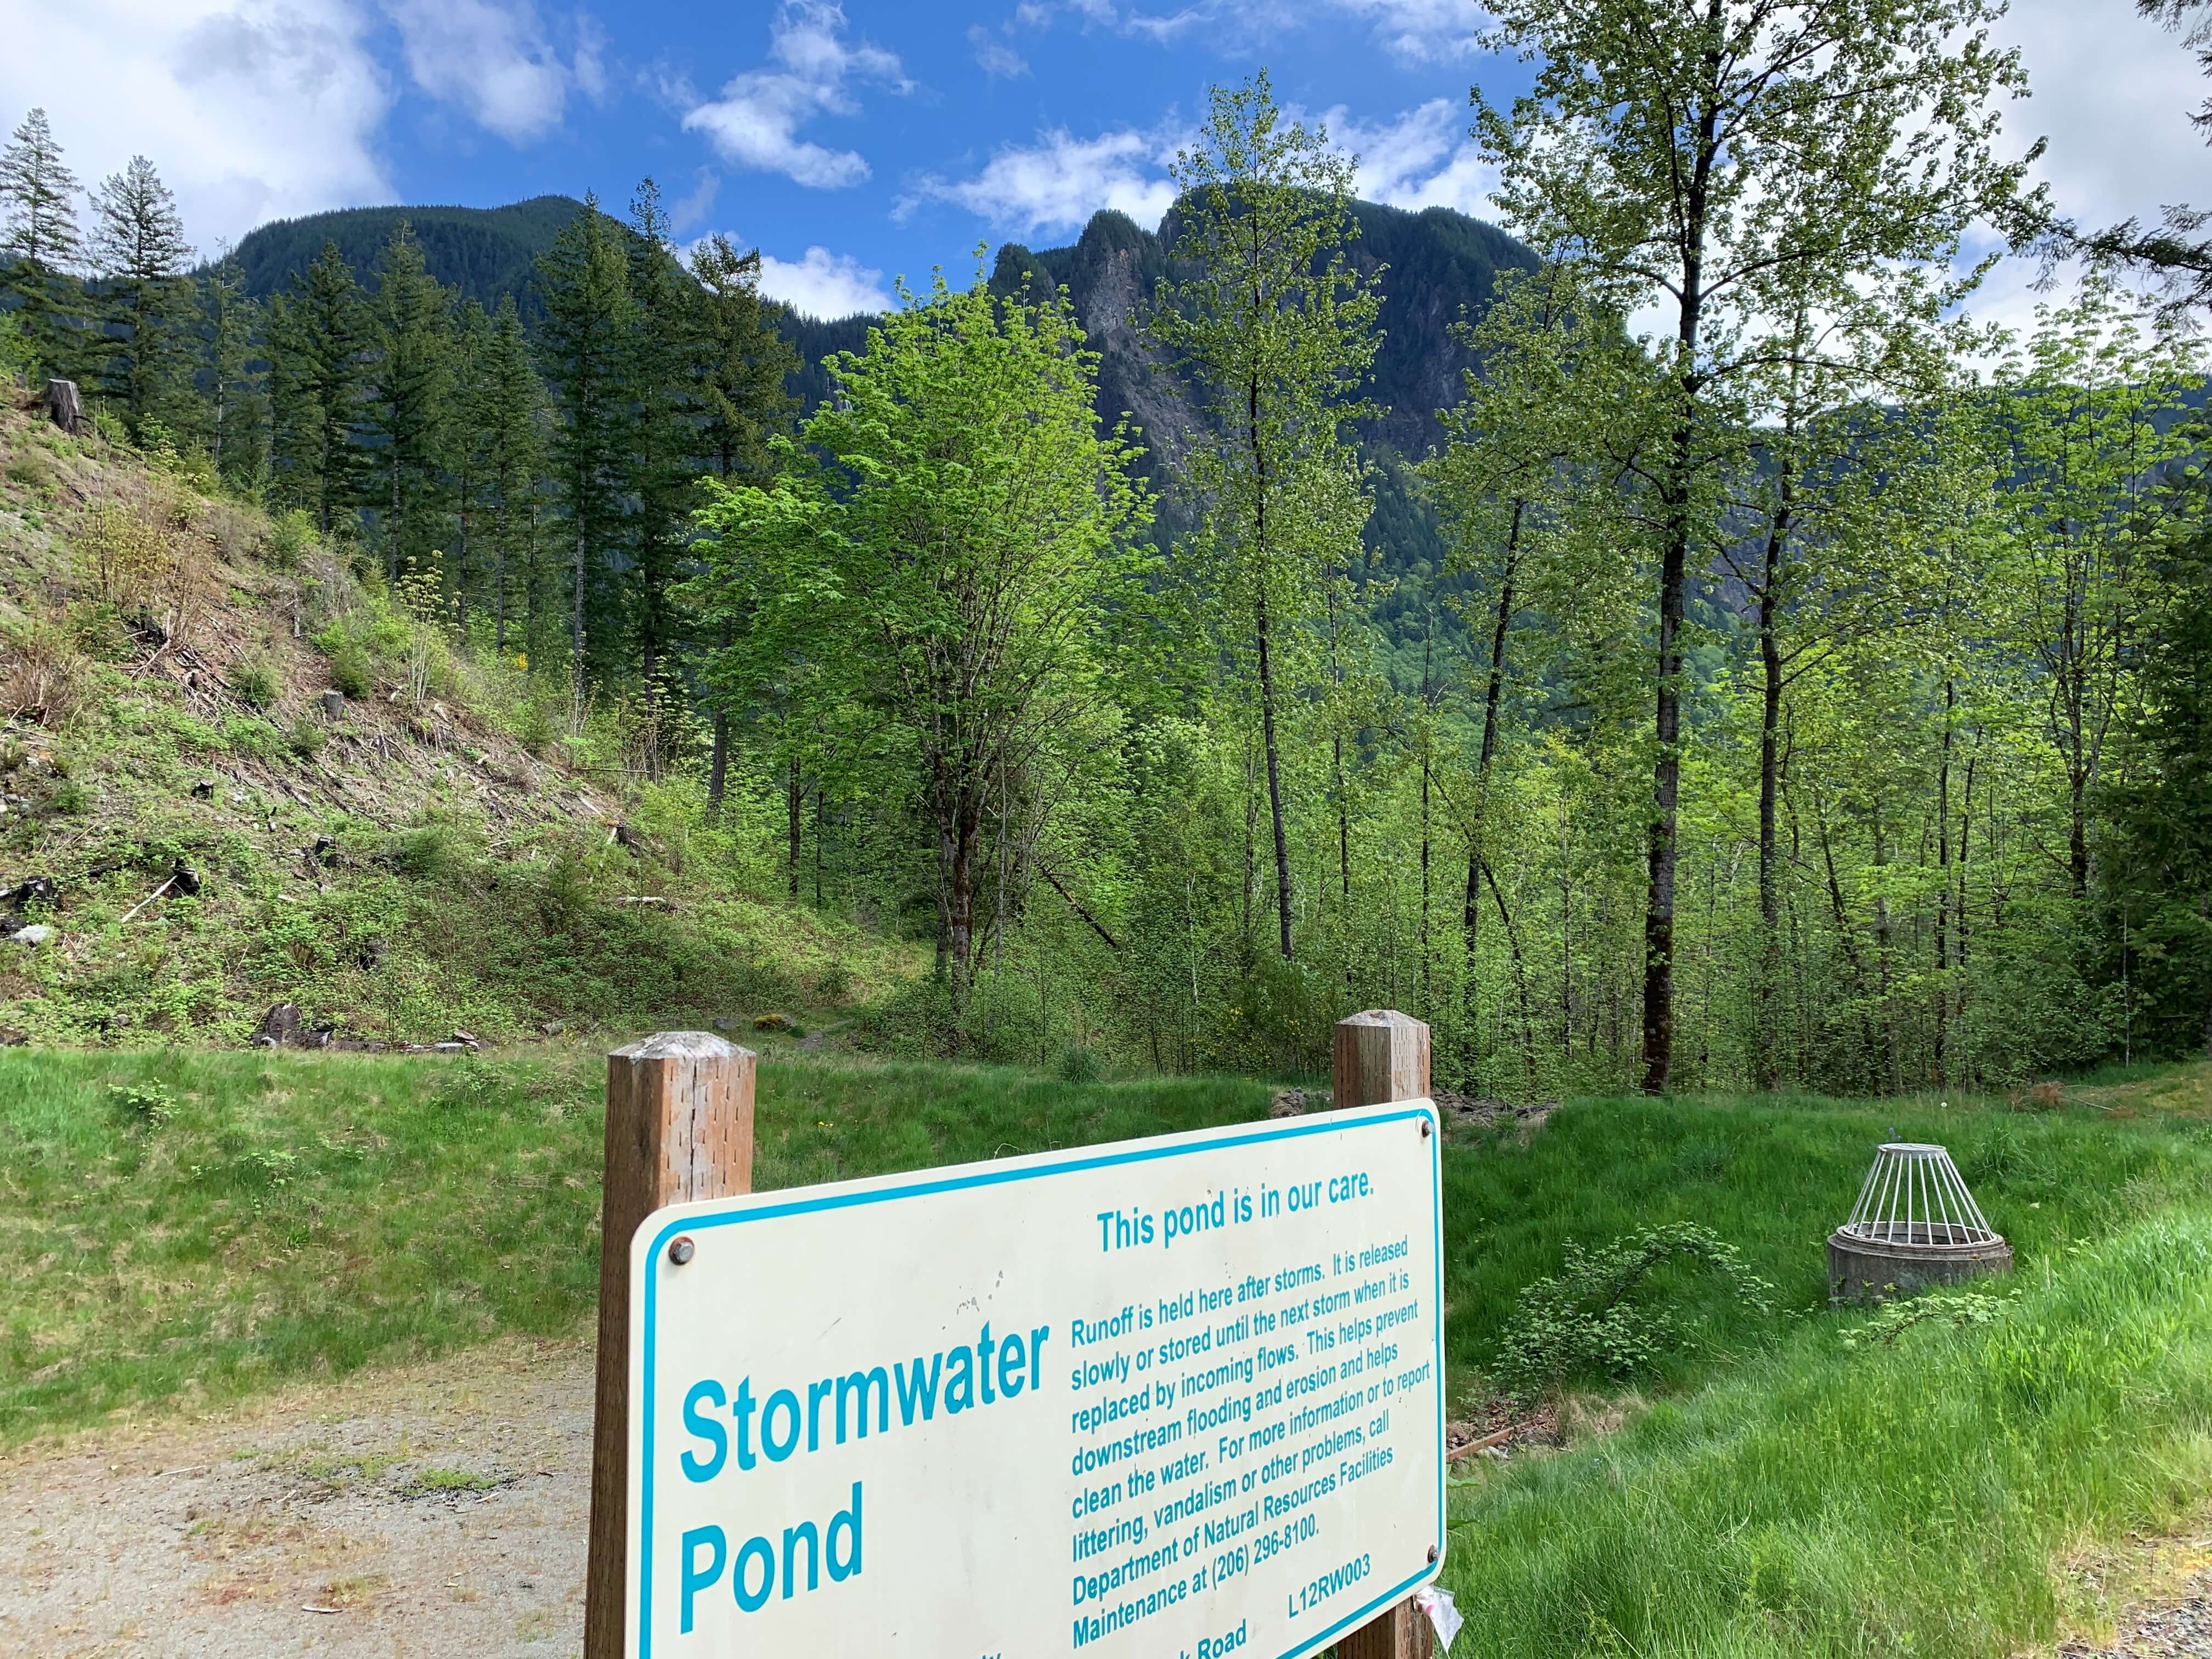 Stormwater facility in North Bend. Stormwater pond signage in front and trees and mountains in the background.